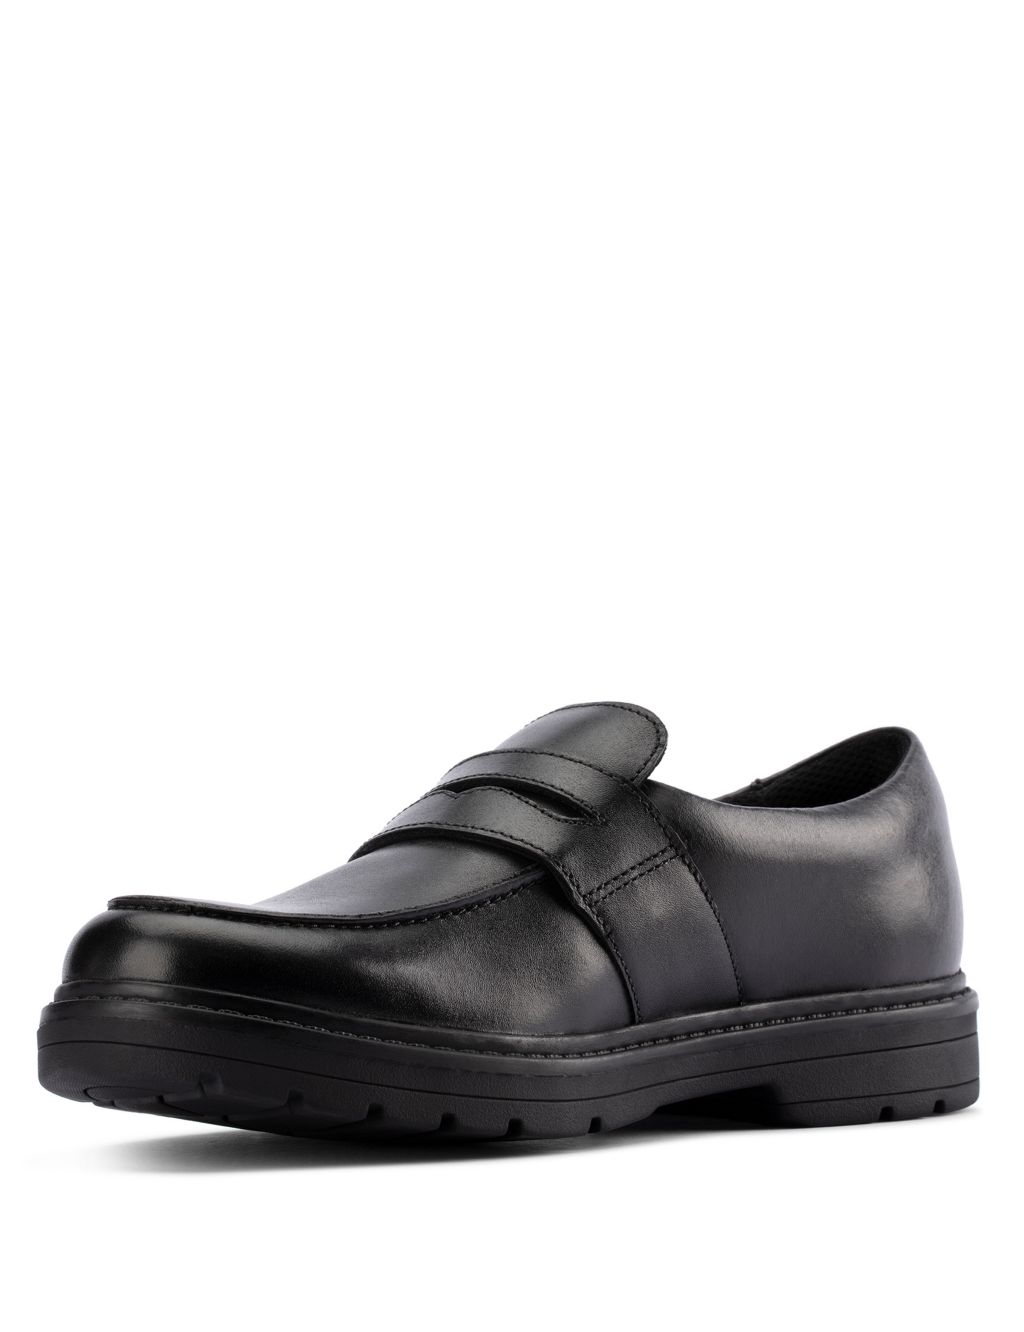 Kids' Leather Slip-On School Shoes (Youth size 3-8) image 5